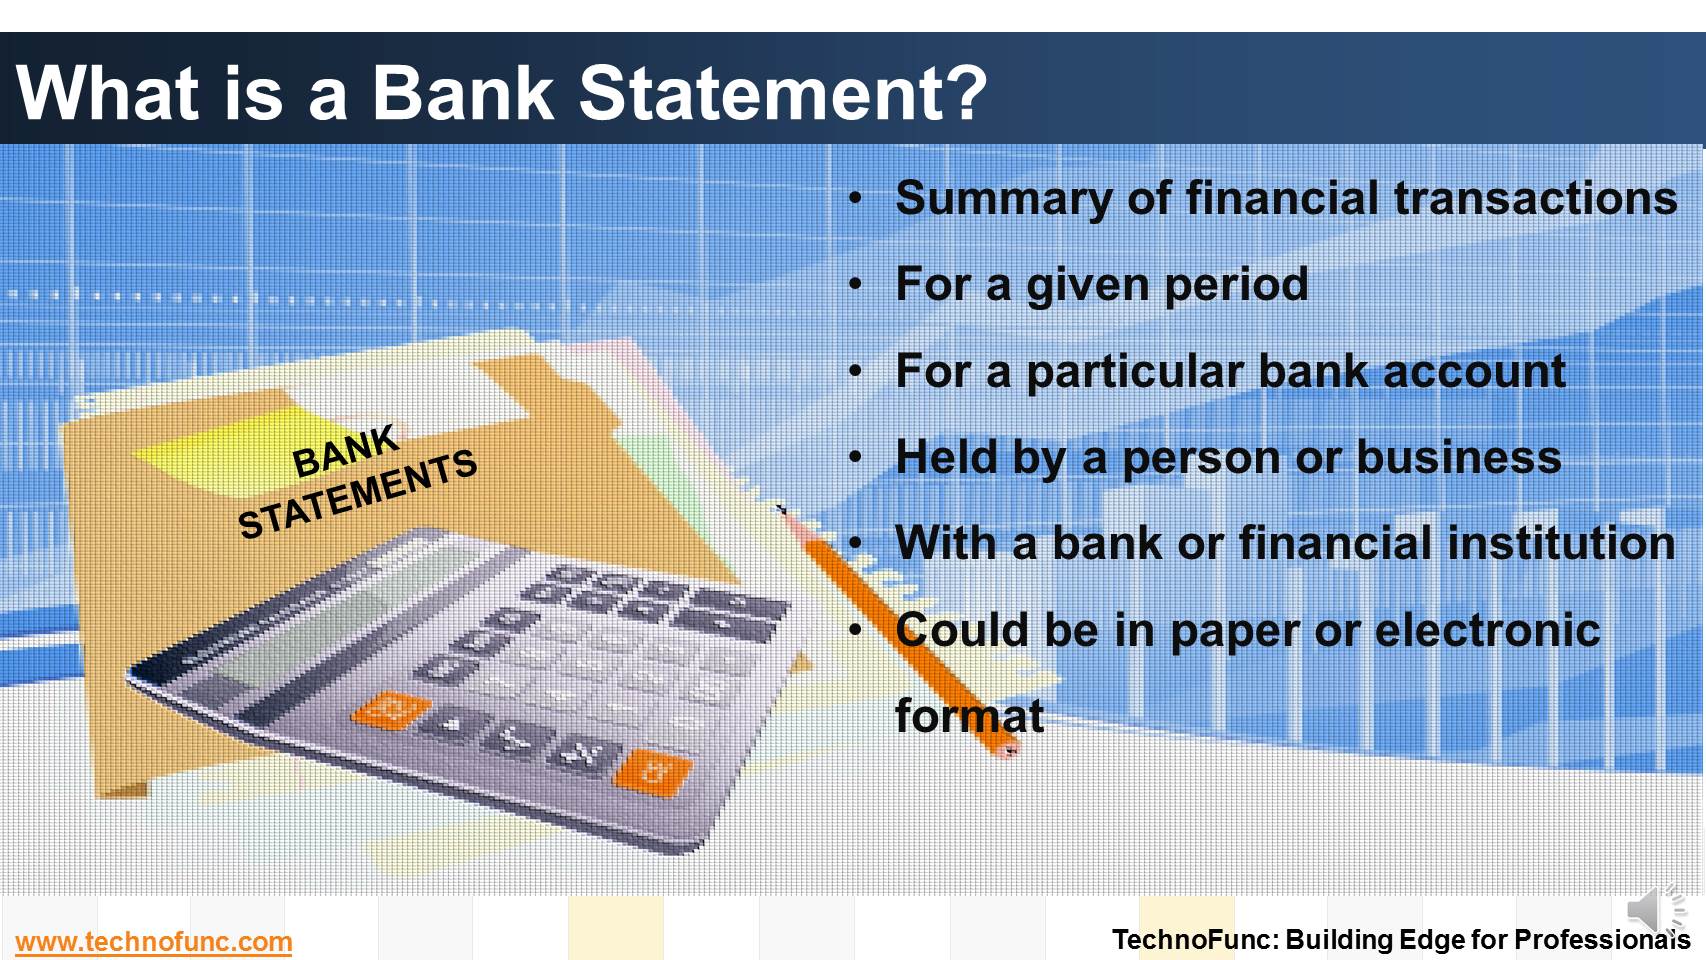 What is a Bank Statement?